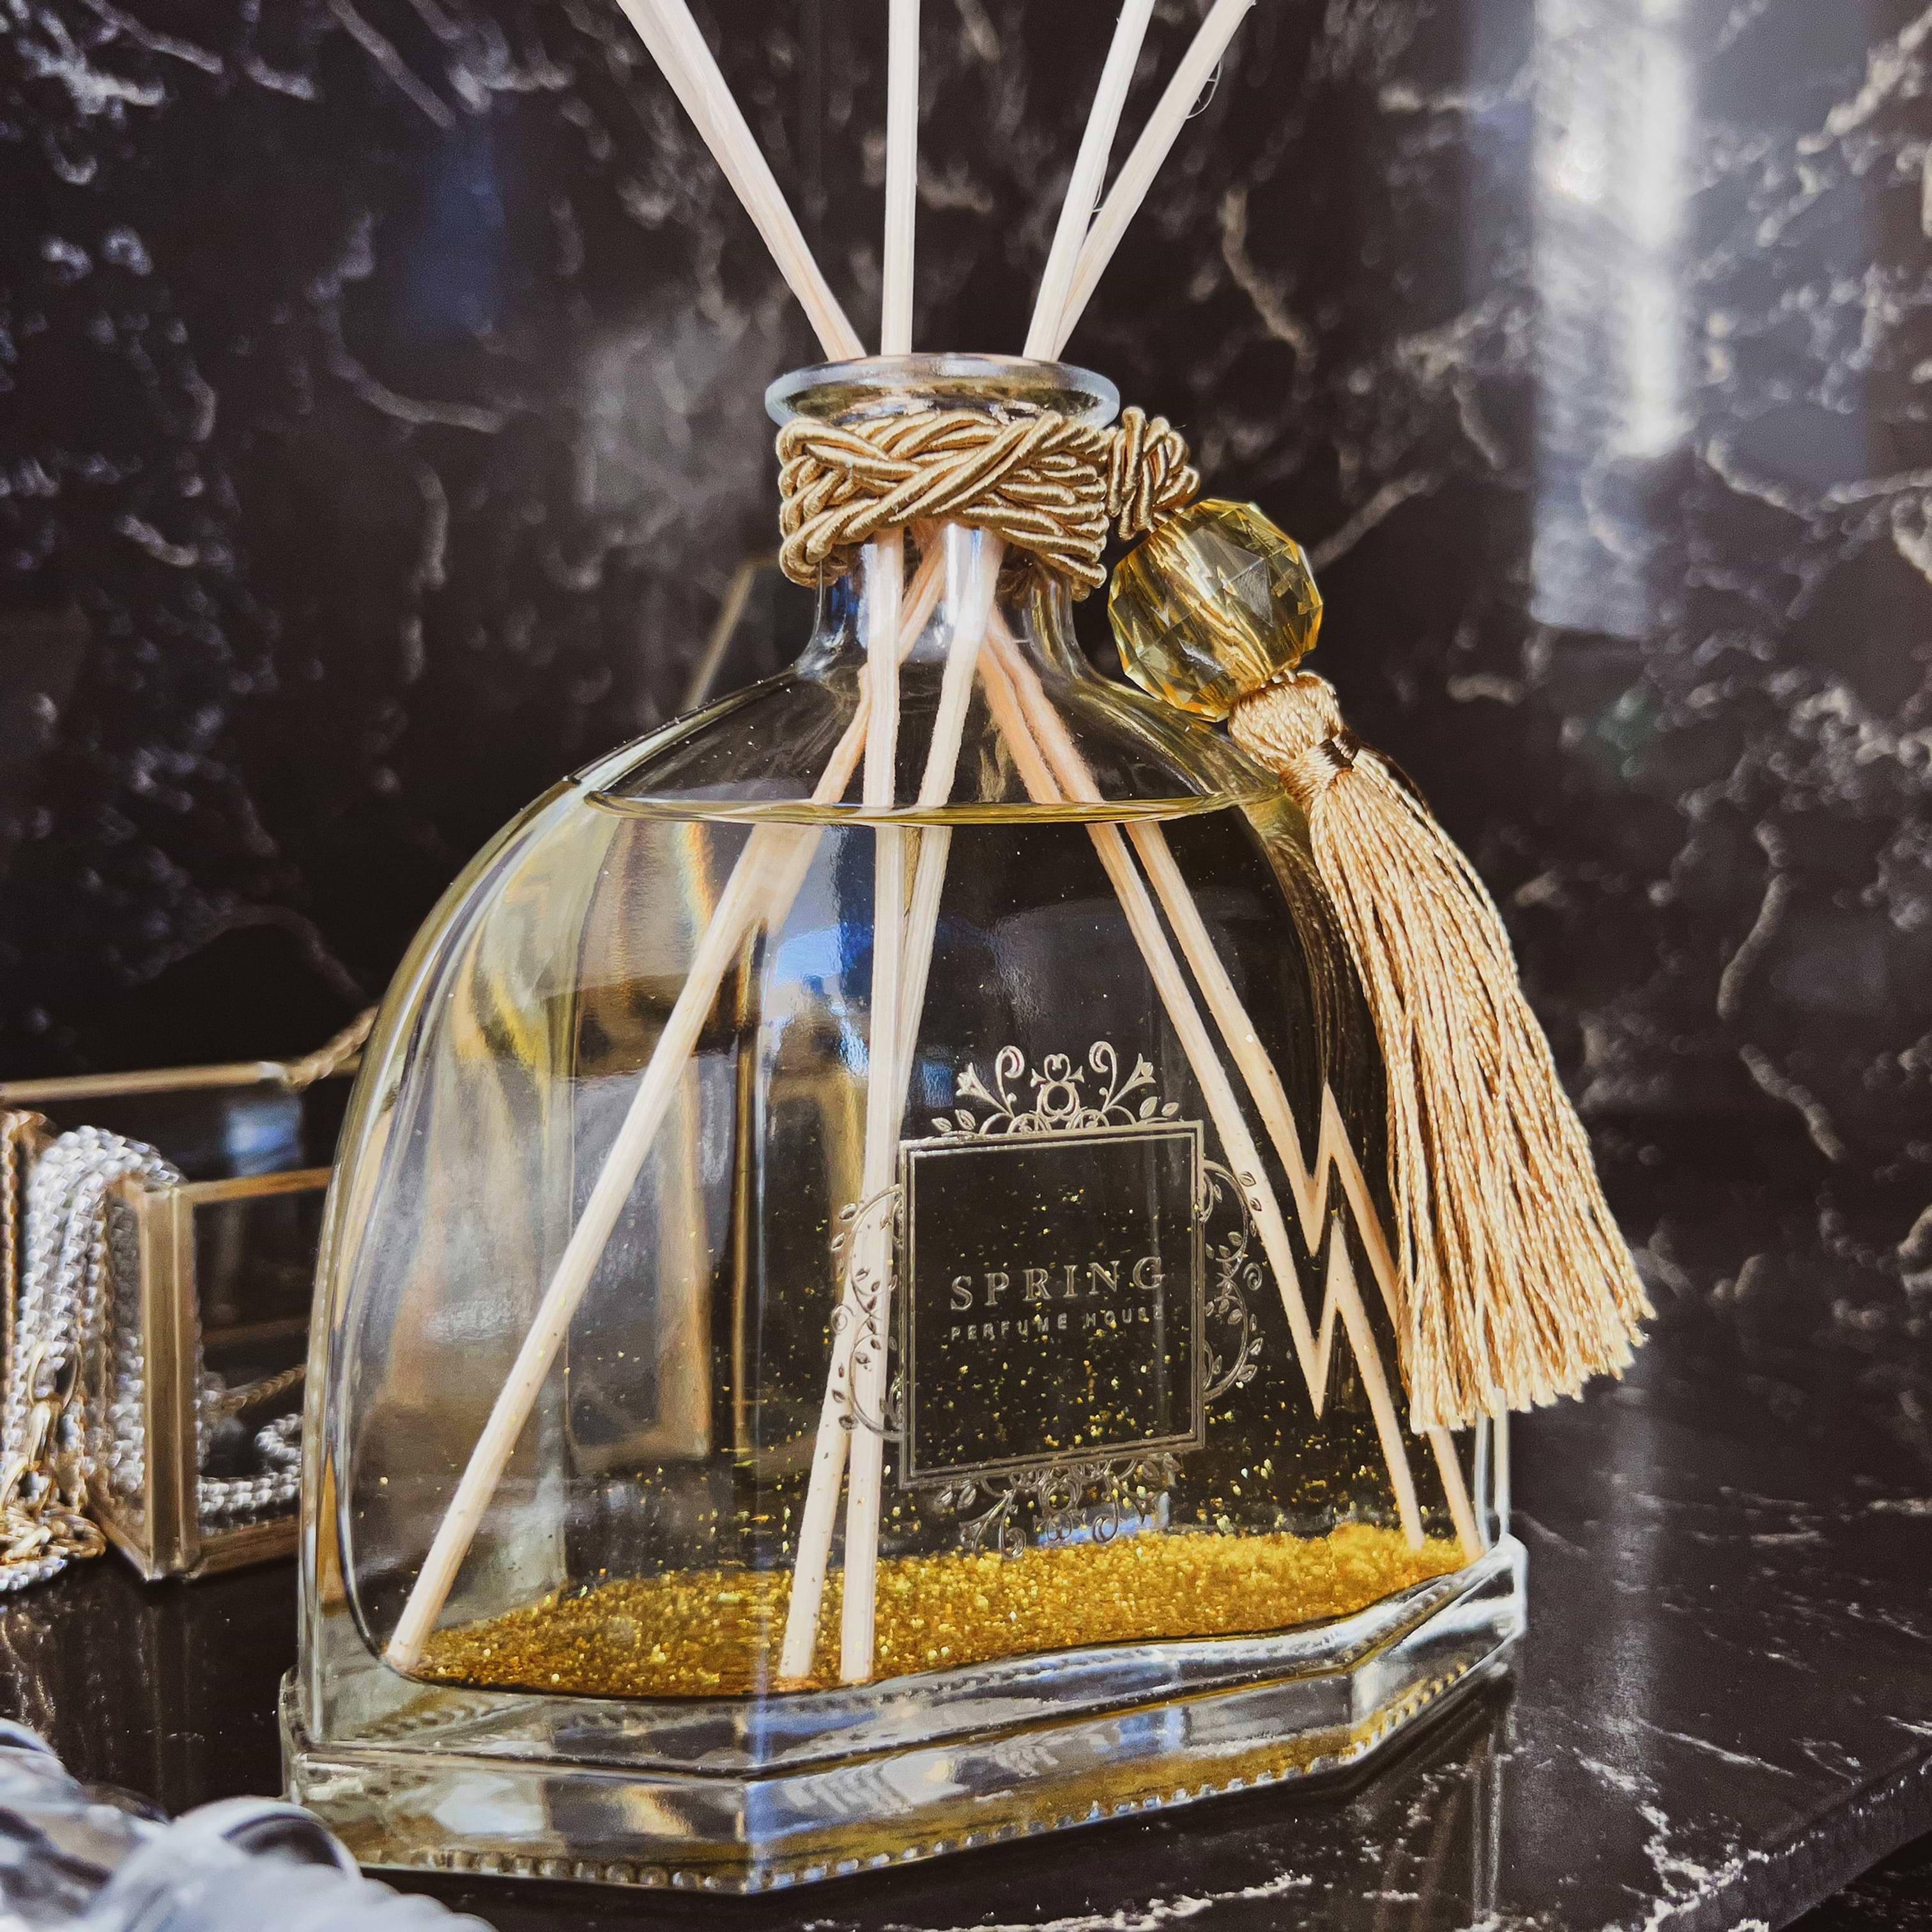 Gold & silver reed diffusers